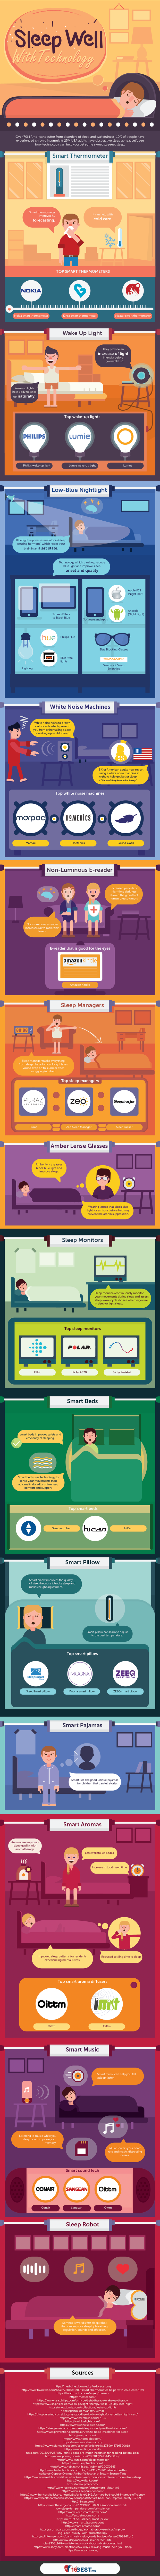 Sleep Well With Technology #Infographic